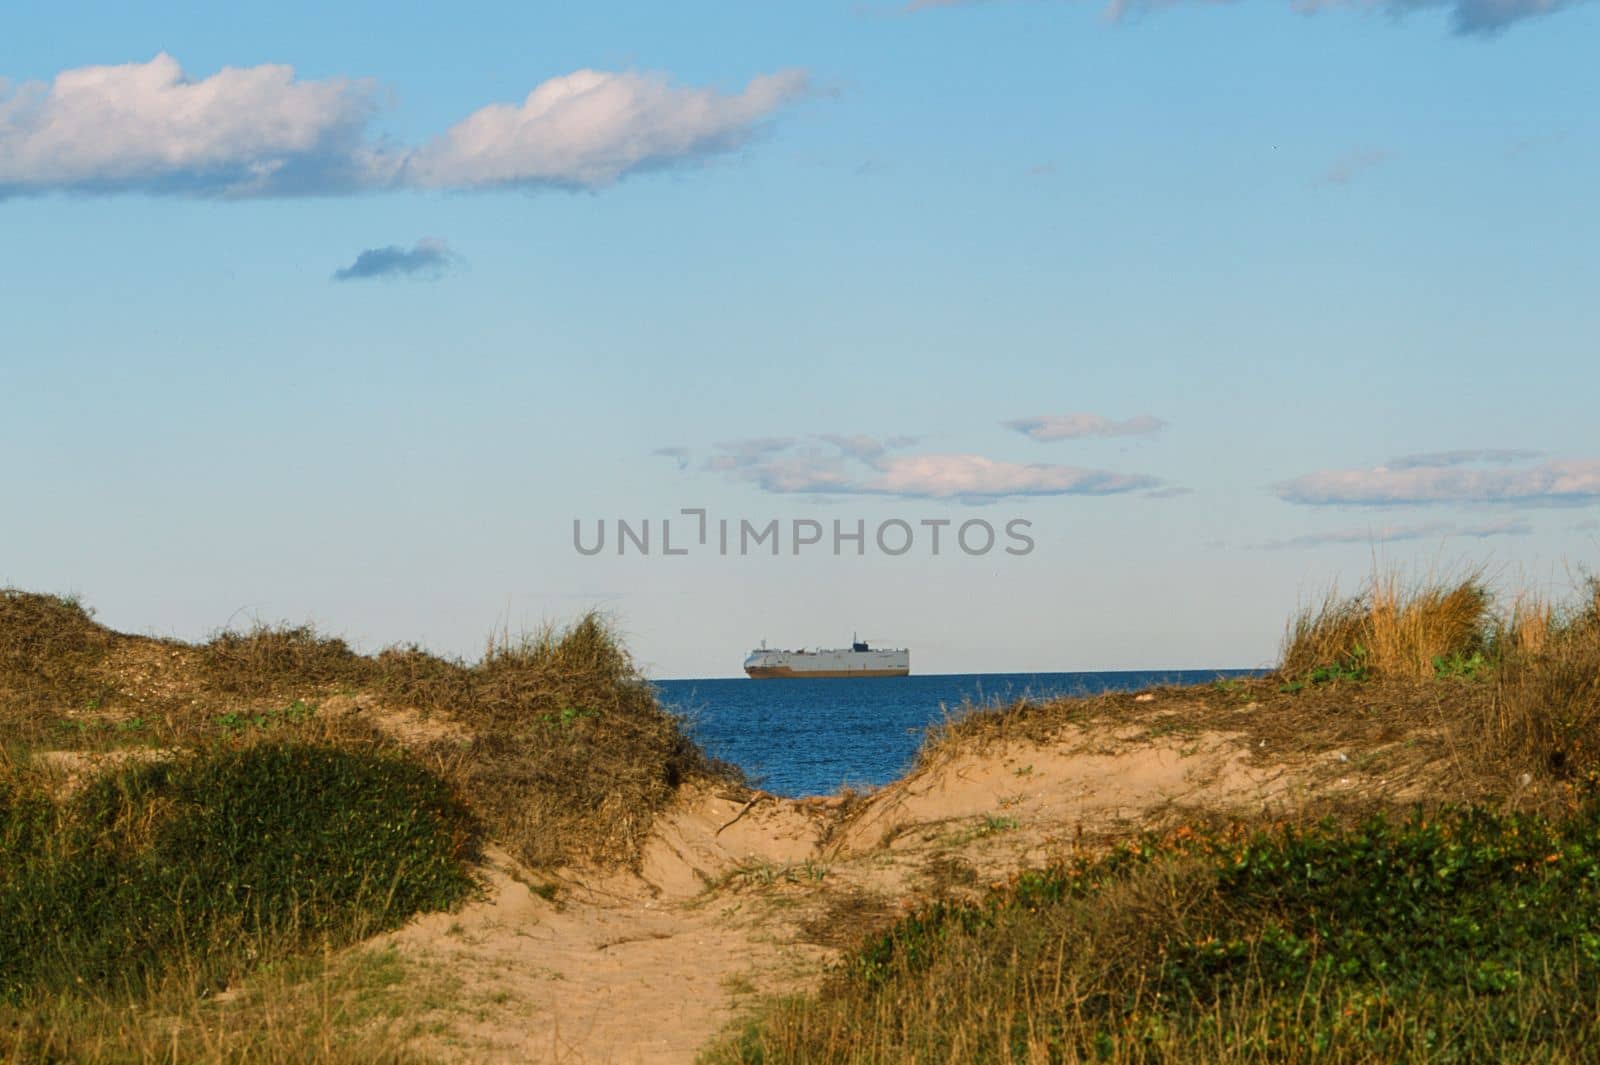 Scenic view of dunes coast with dry grass and sea under cloudy sky and a cargo ship in the middle of the frame